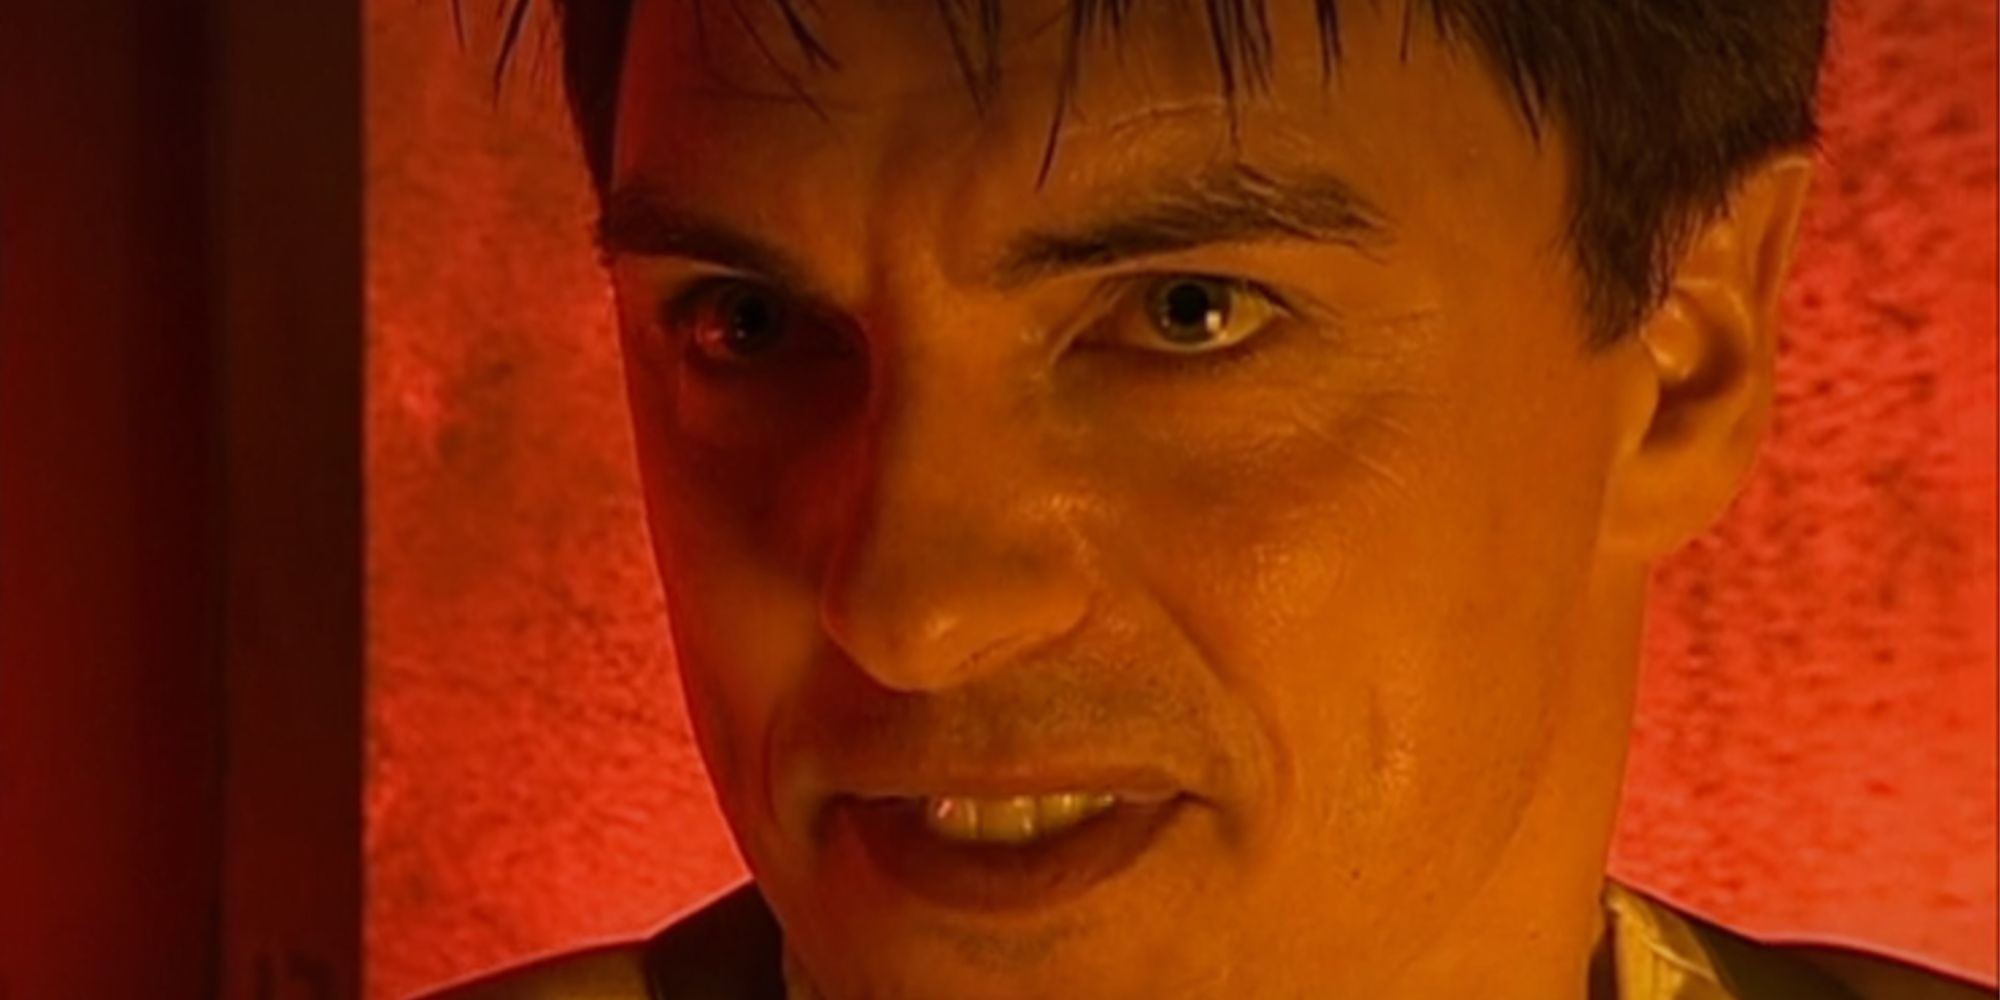 John Barrowman as Jack Harkness looking strained in Doctor Who